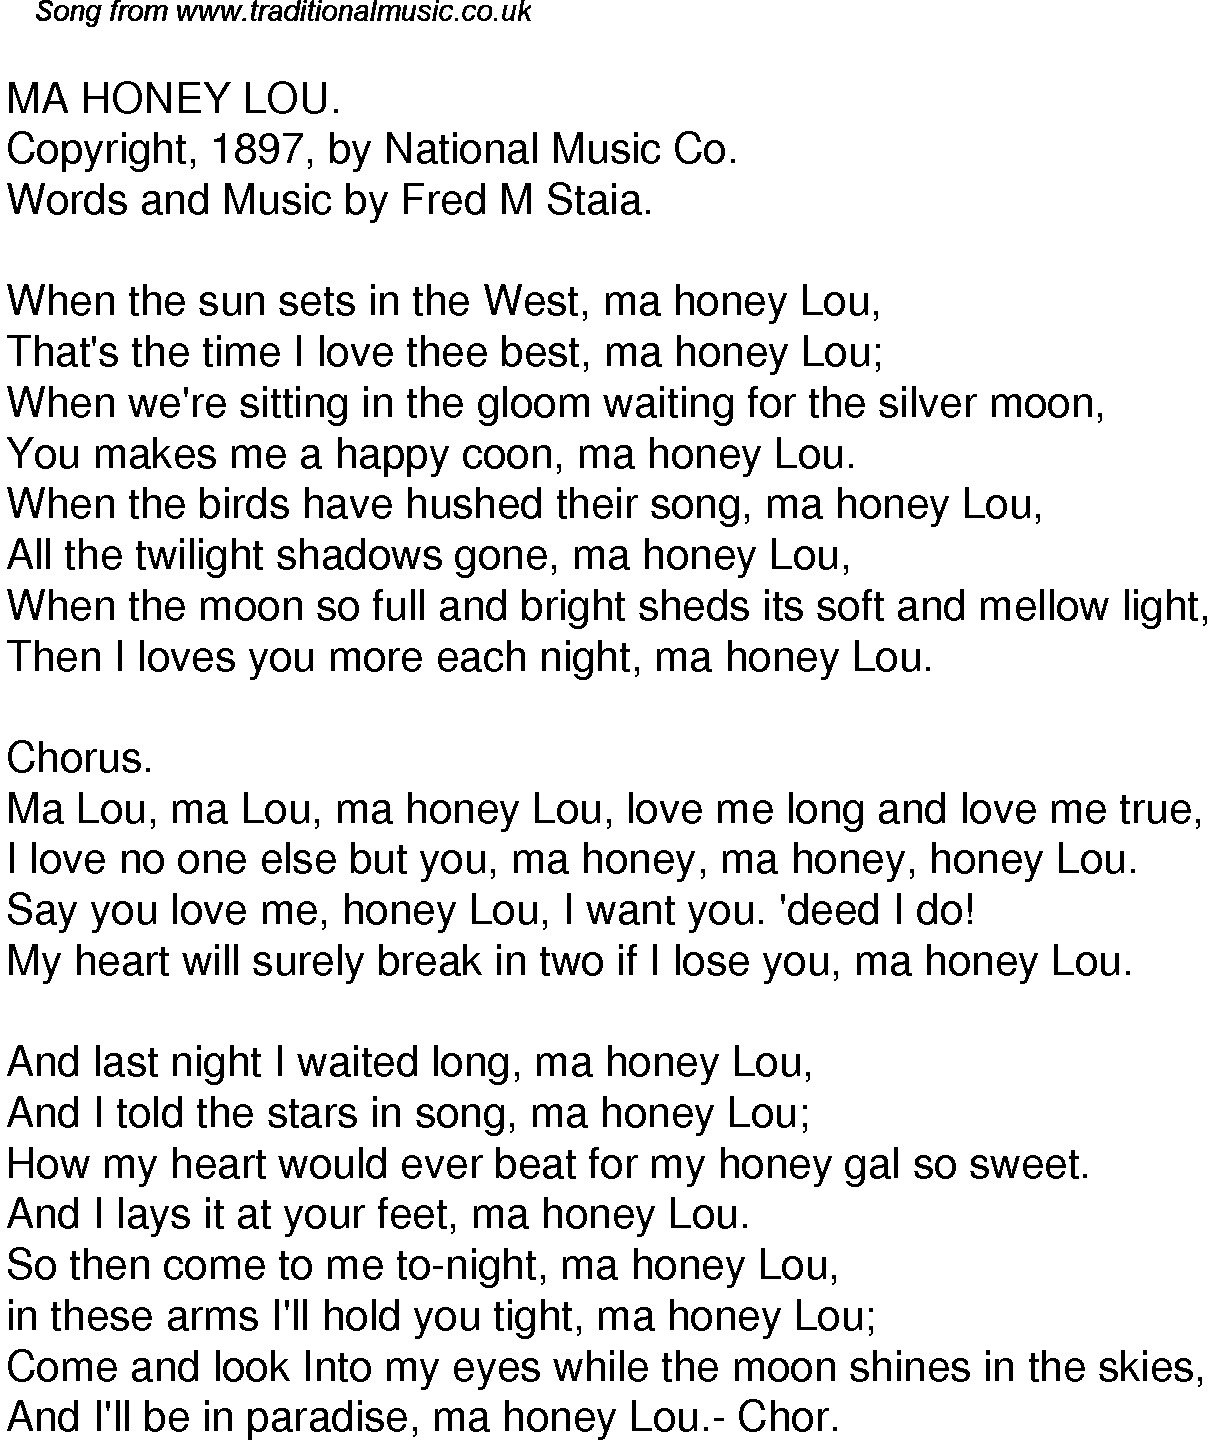 Old Time Song Lyrics For 60 Ma Honey Lou